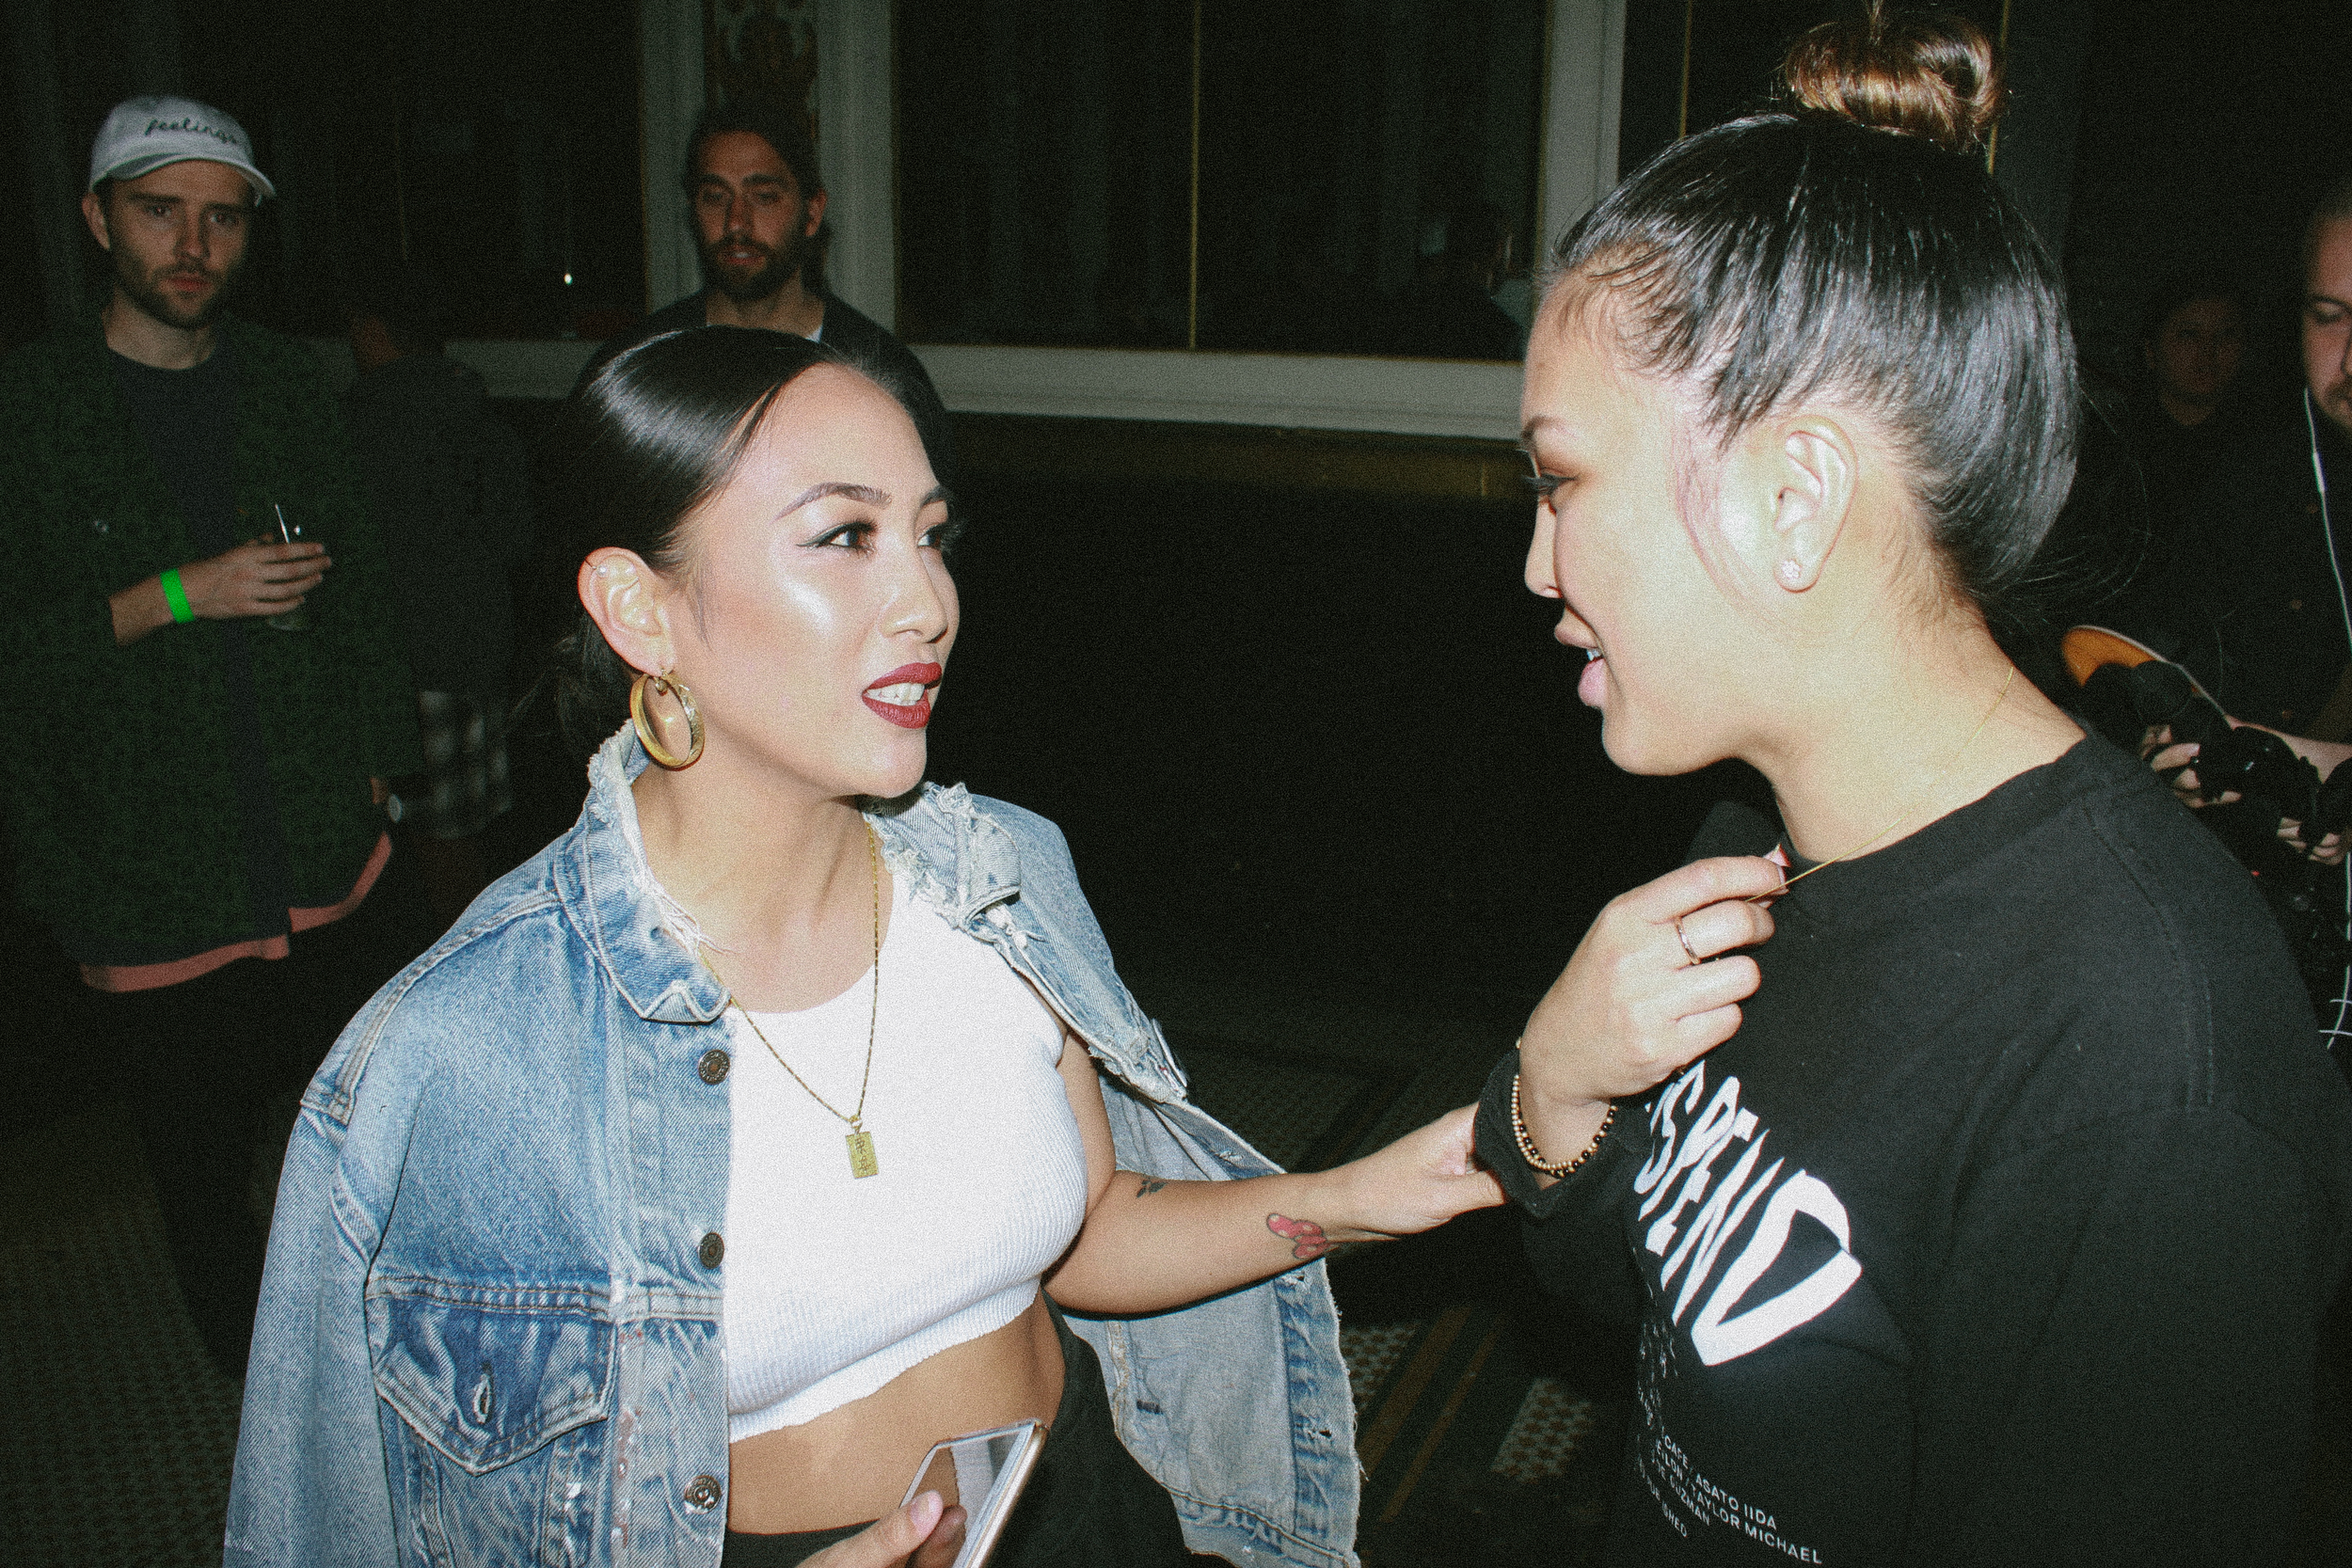  Miss Lawn of HLZBLZ and EIC Diane Abapo at the SUSPEND Magazine ISSUE 06 Launch at Globe Theater (Feb 11). / Photo: © Emil Ravelo, SUSPEND Magazine. 